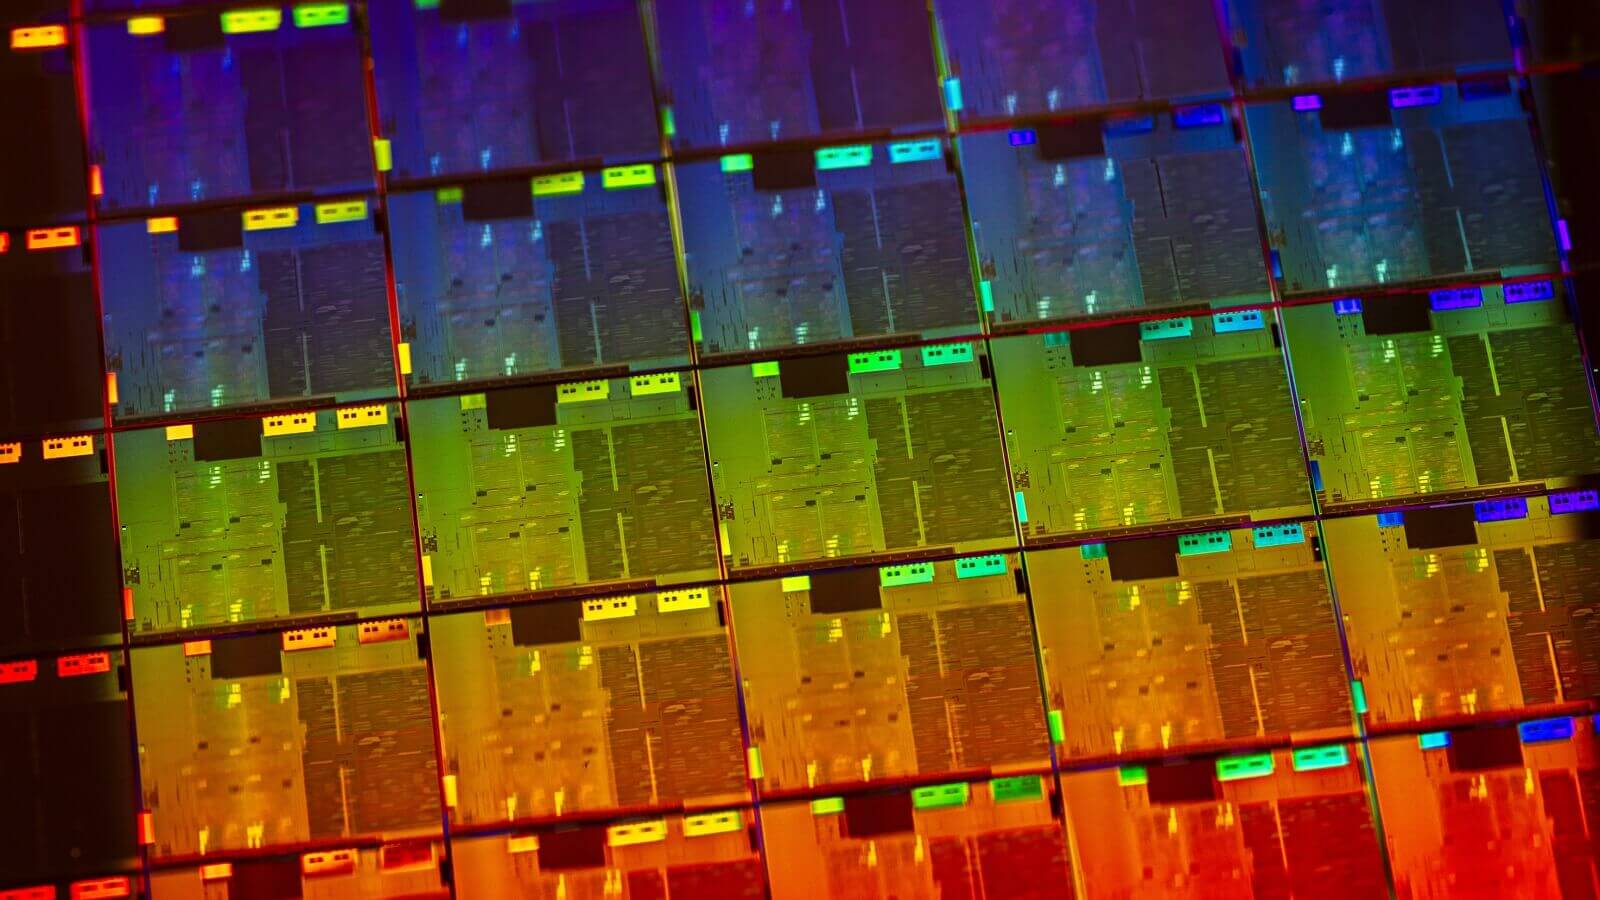 Samsung is reportedly making 14nm CPUs for Intel as supply issues persist